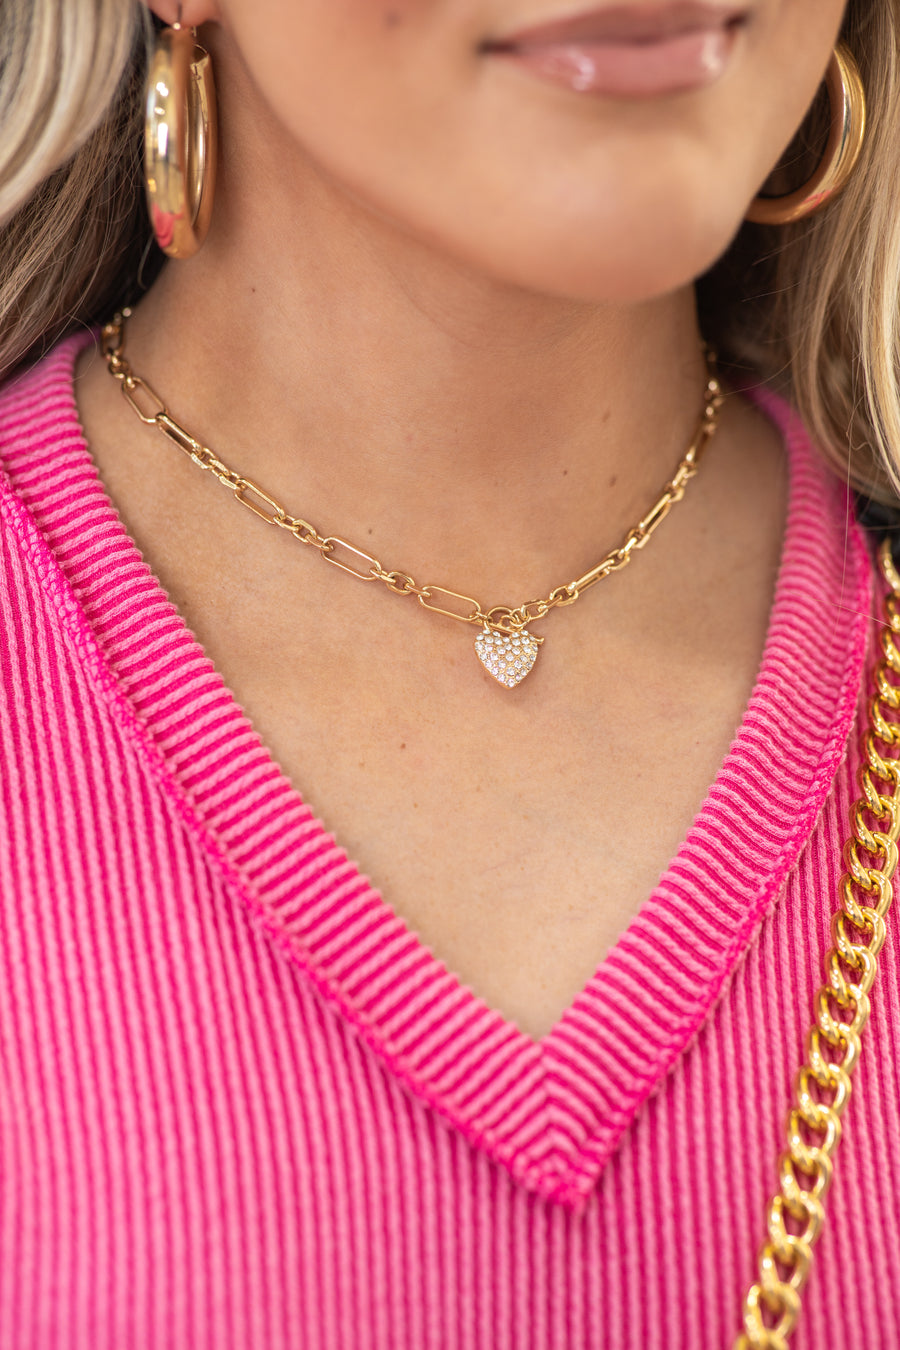 Gold Link Chain Rhinestone Heart Necklace